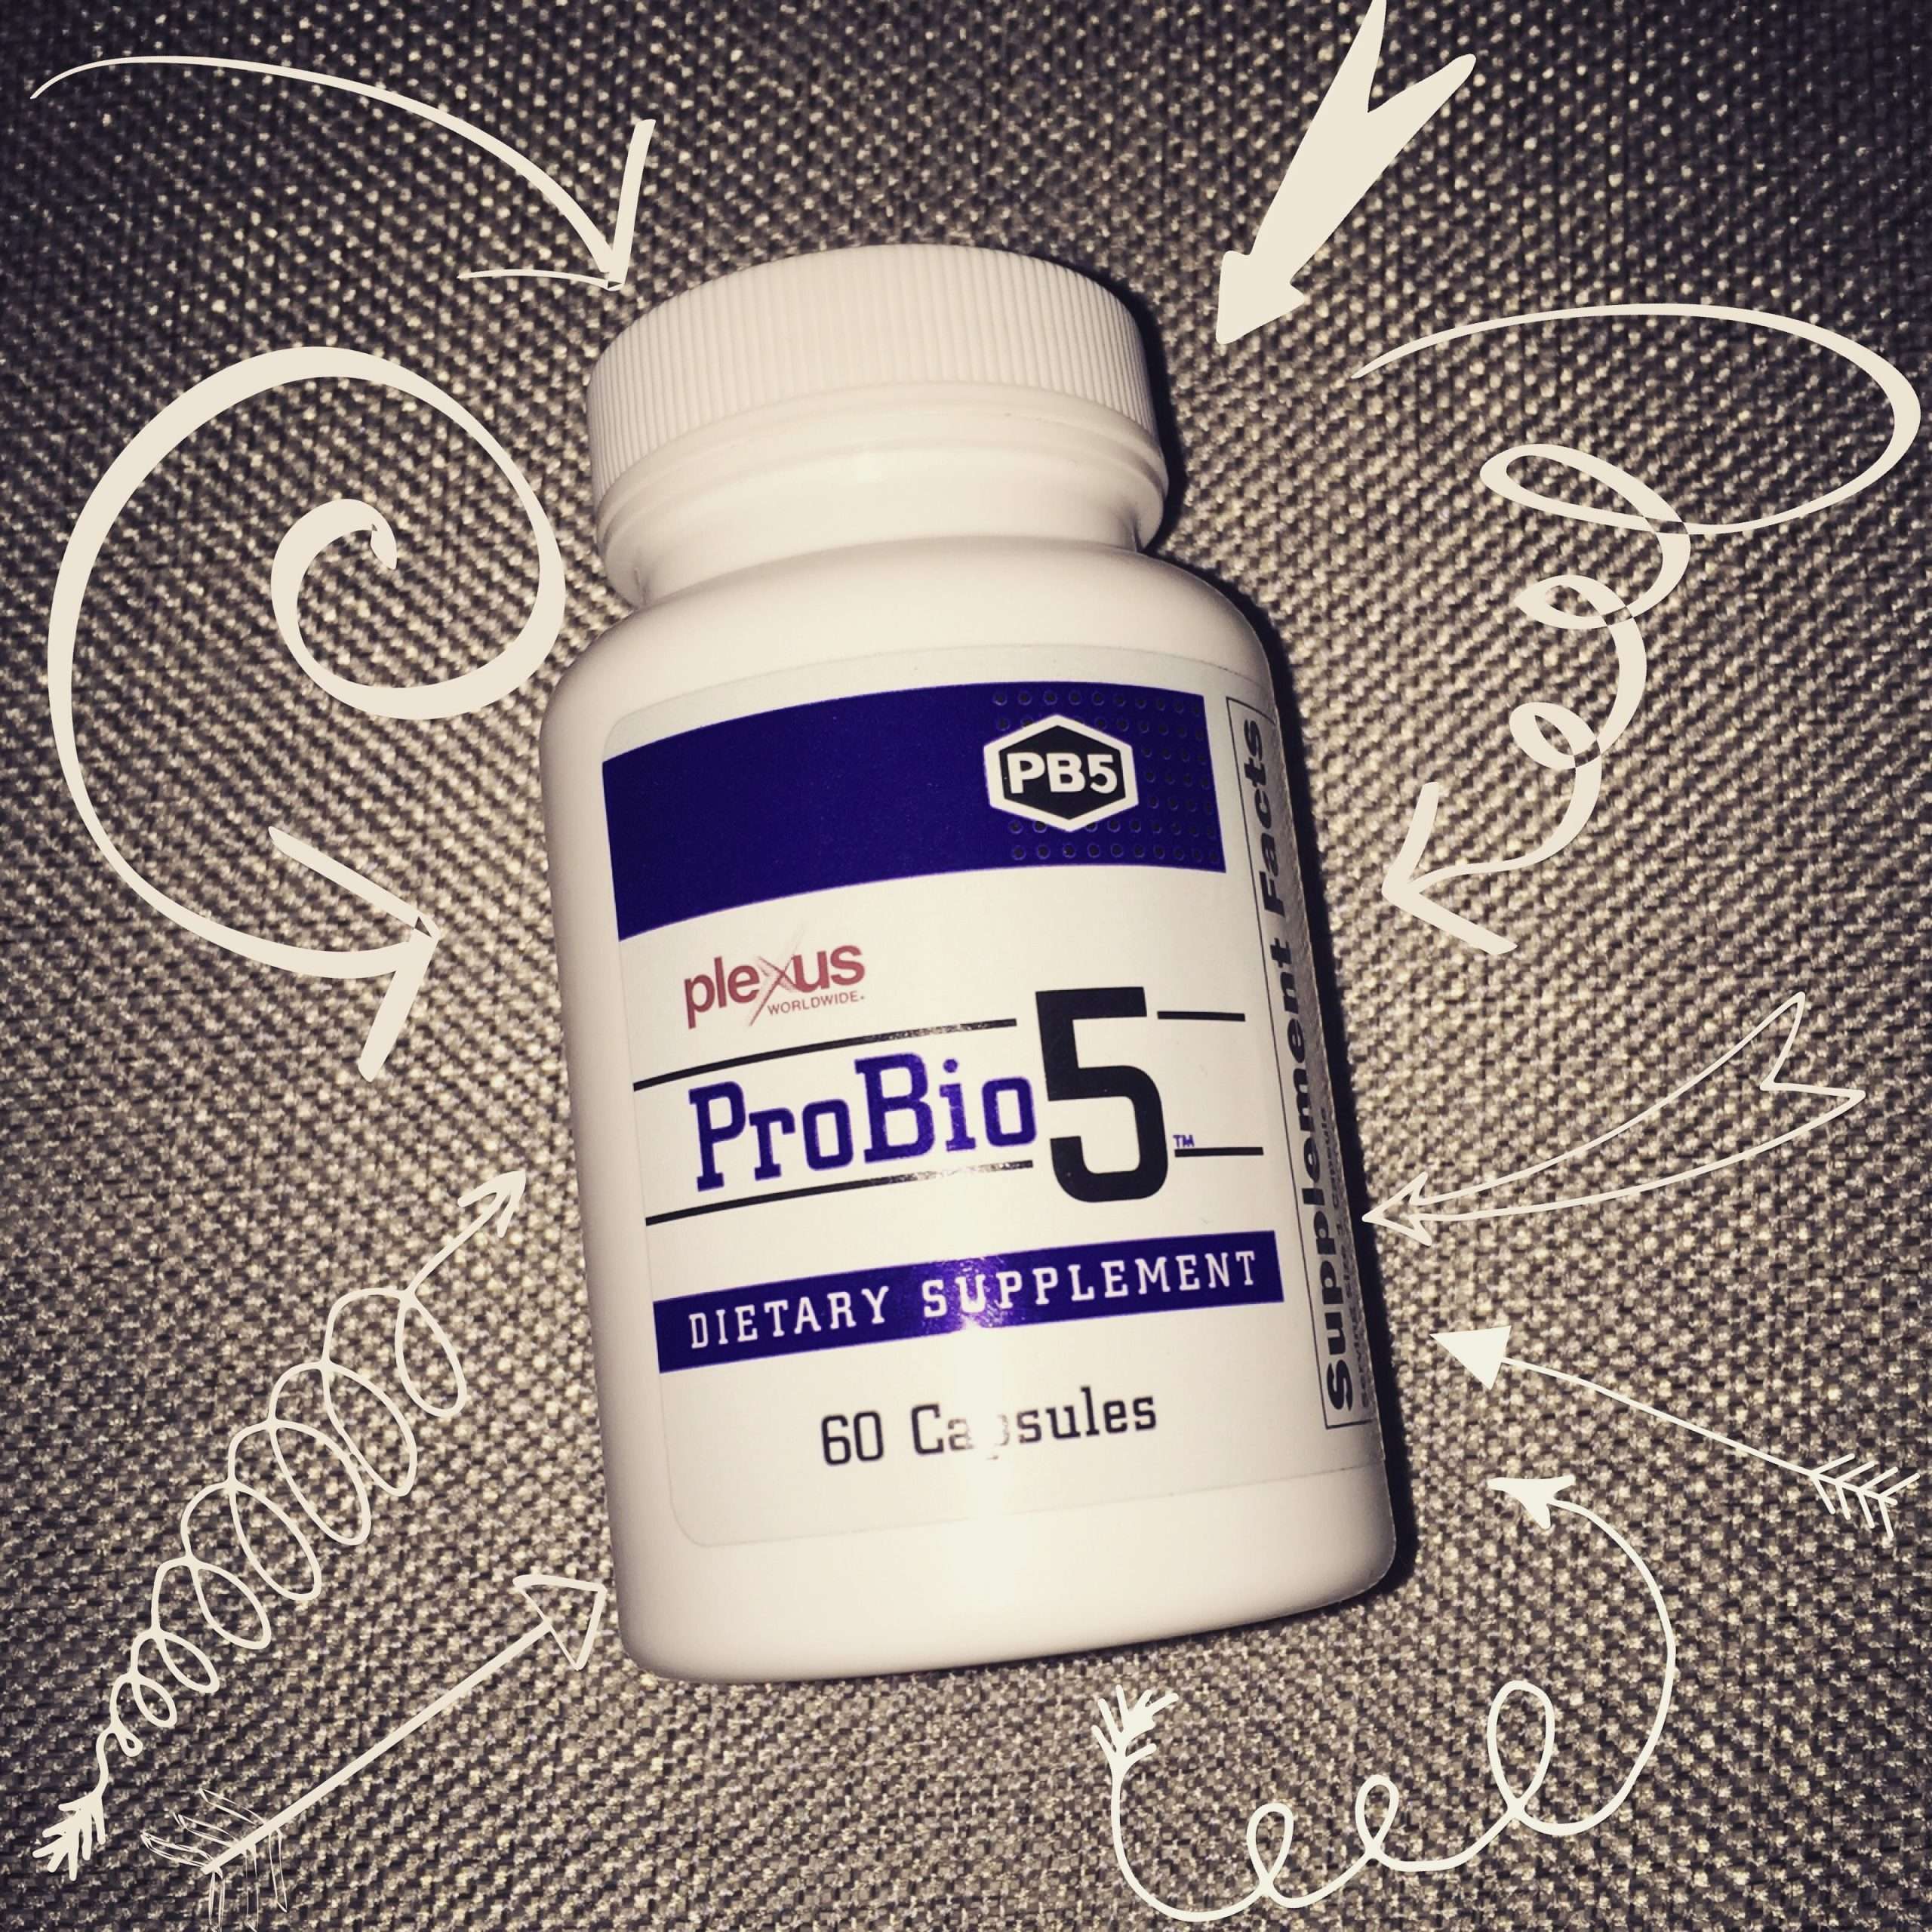 Best probiotic you can find!